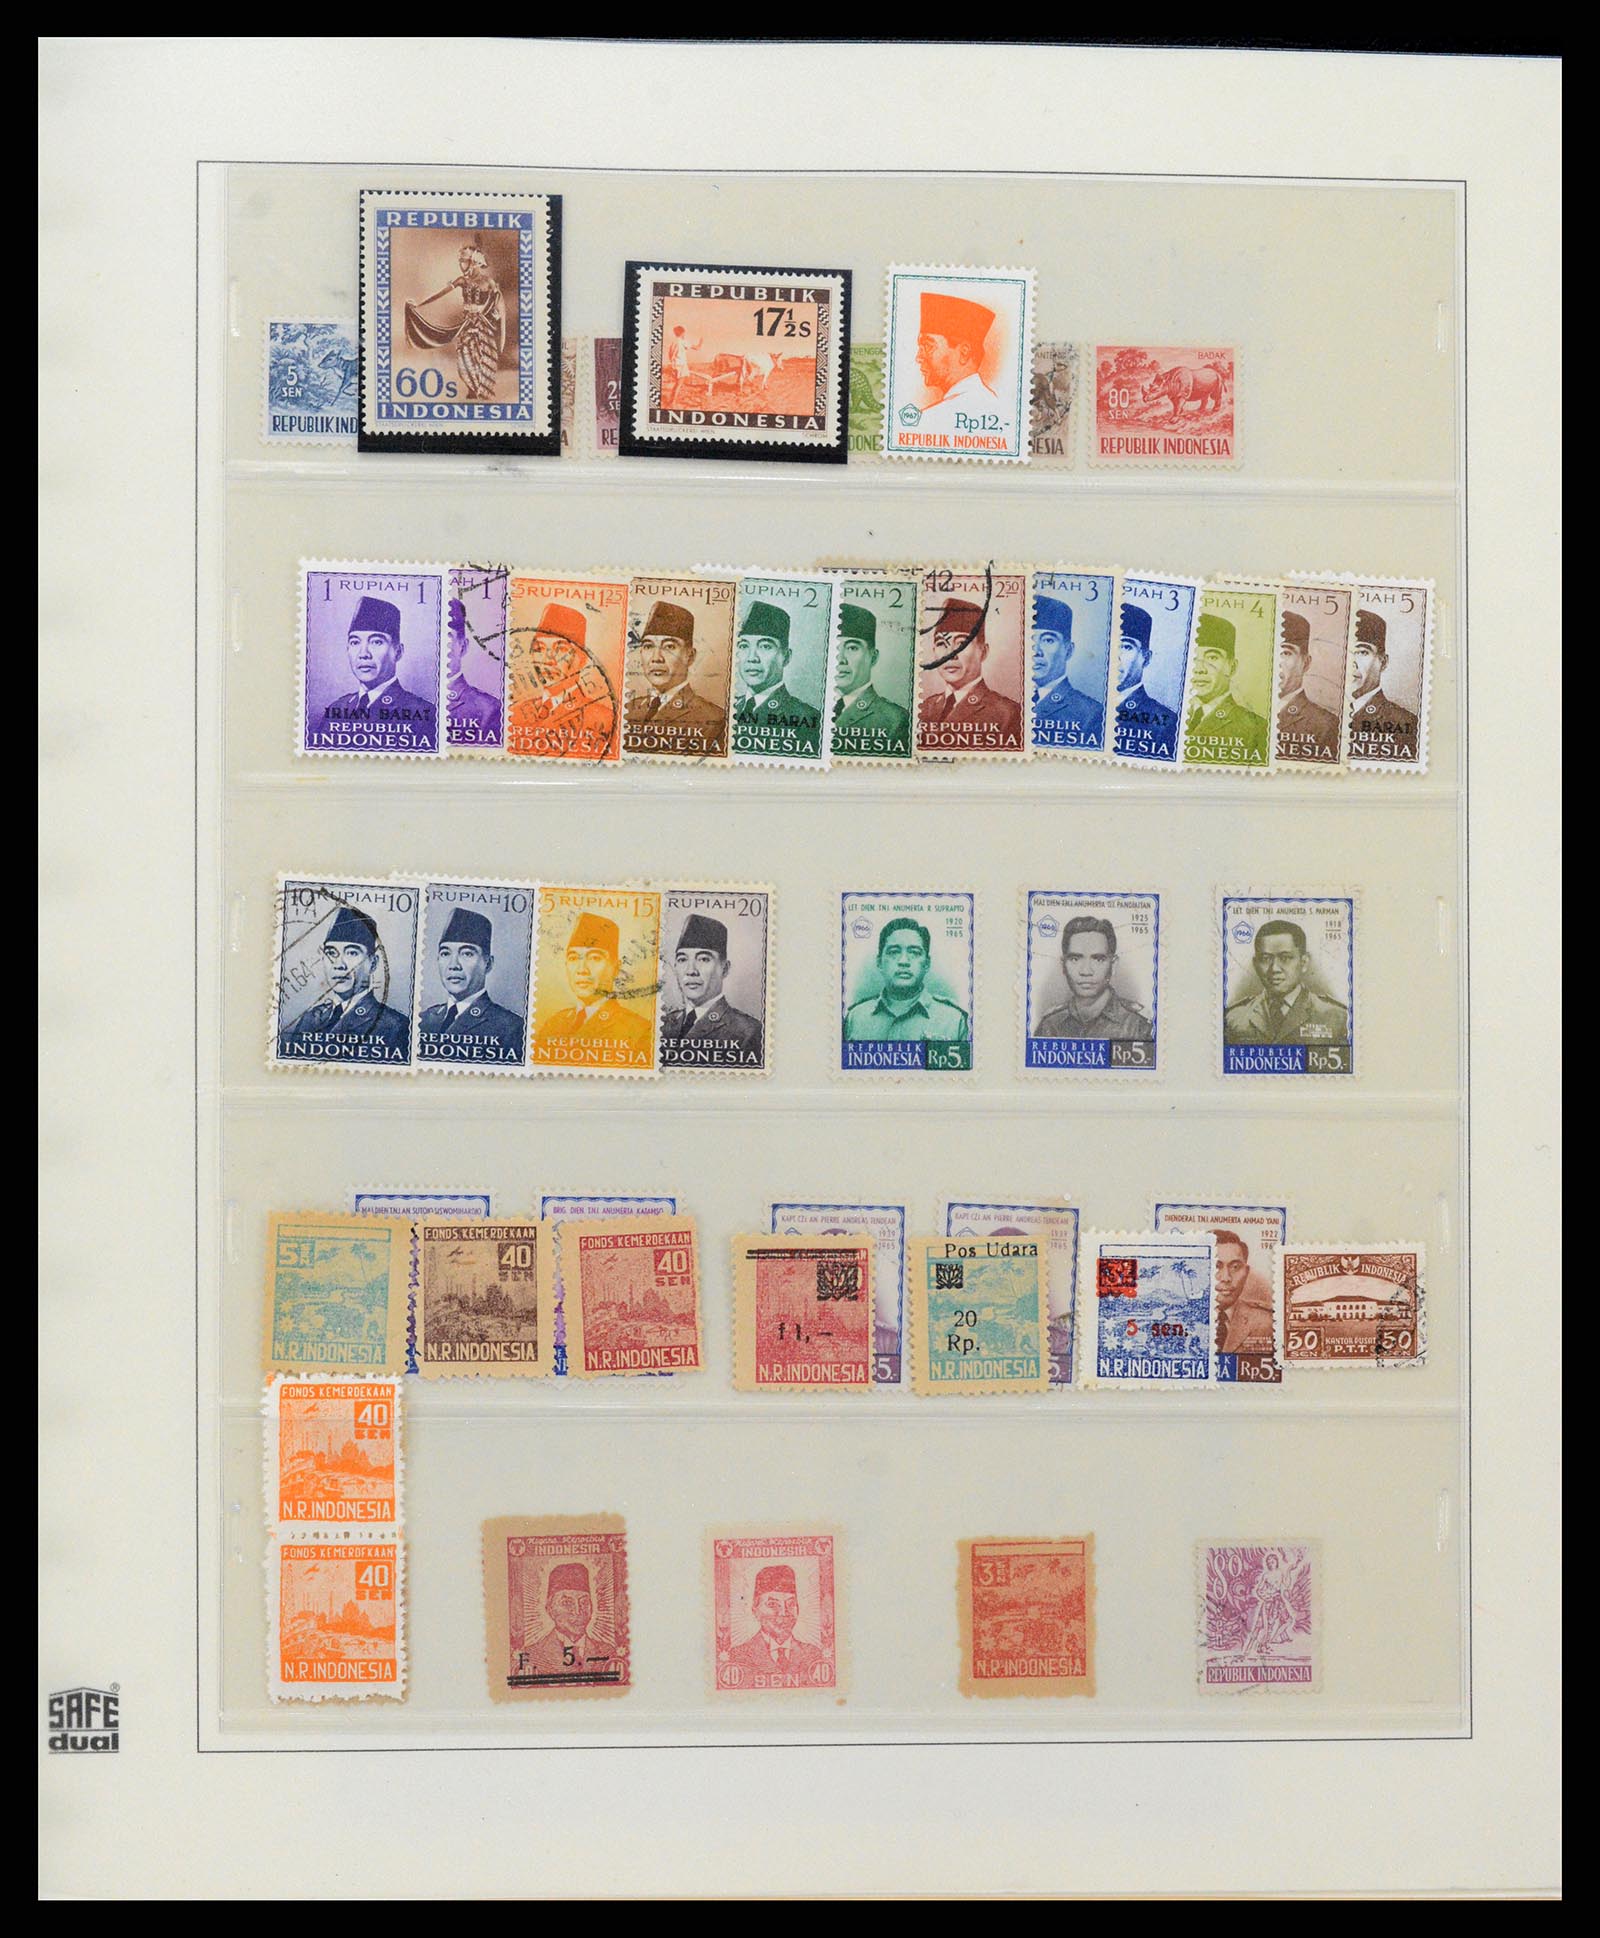 37689 048 - Stamp collection 37689 Japanese occupation Dutch East Indies and interim